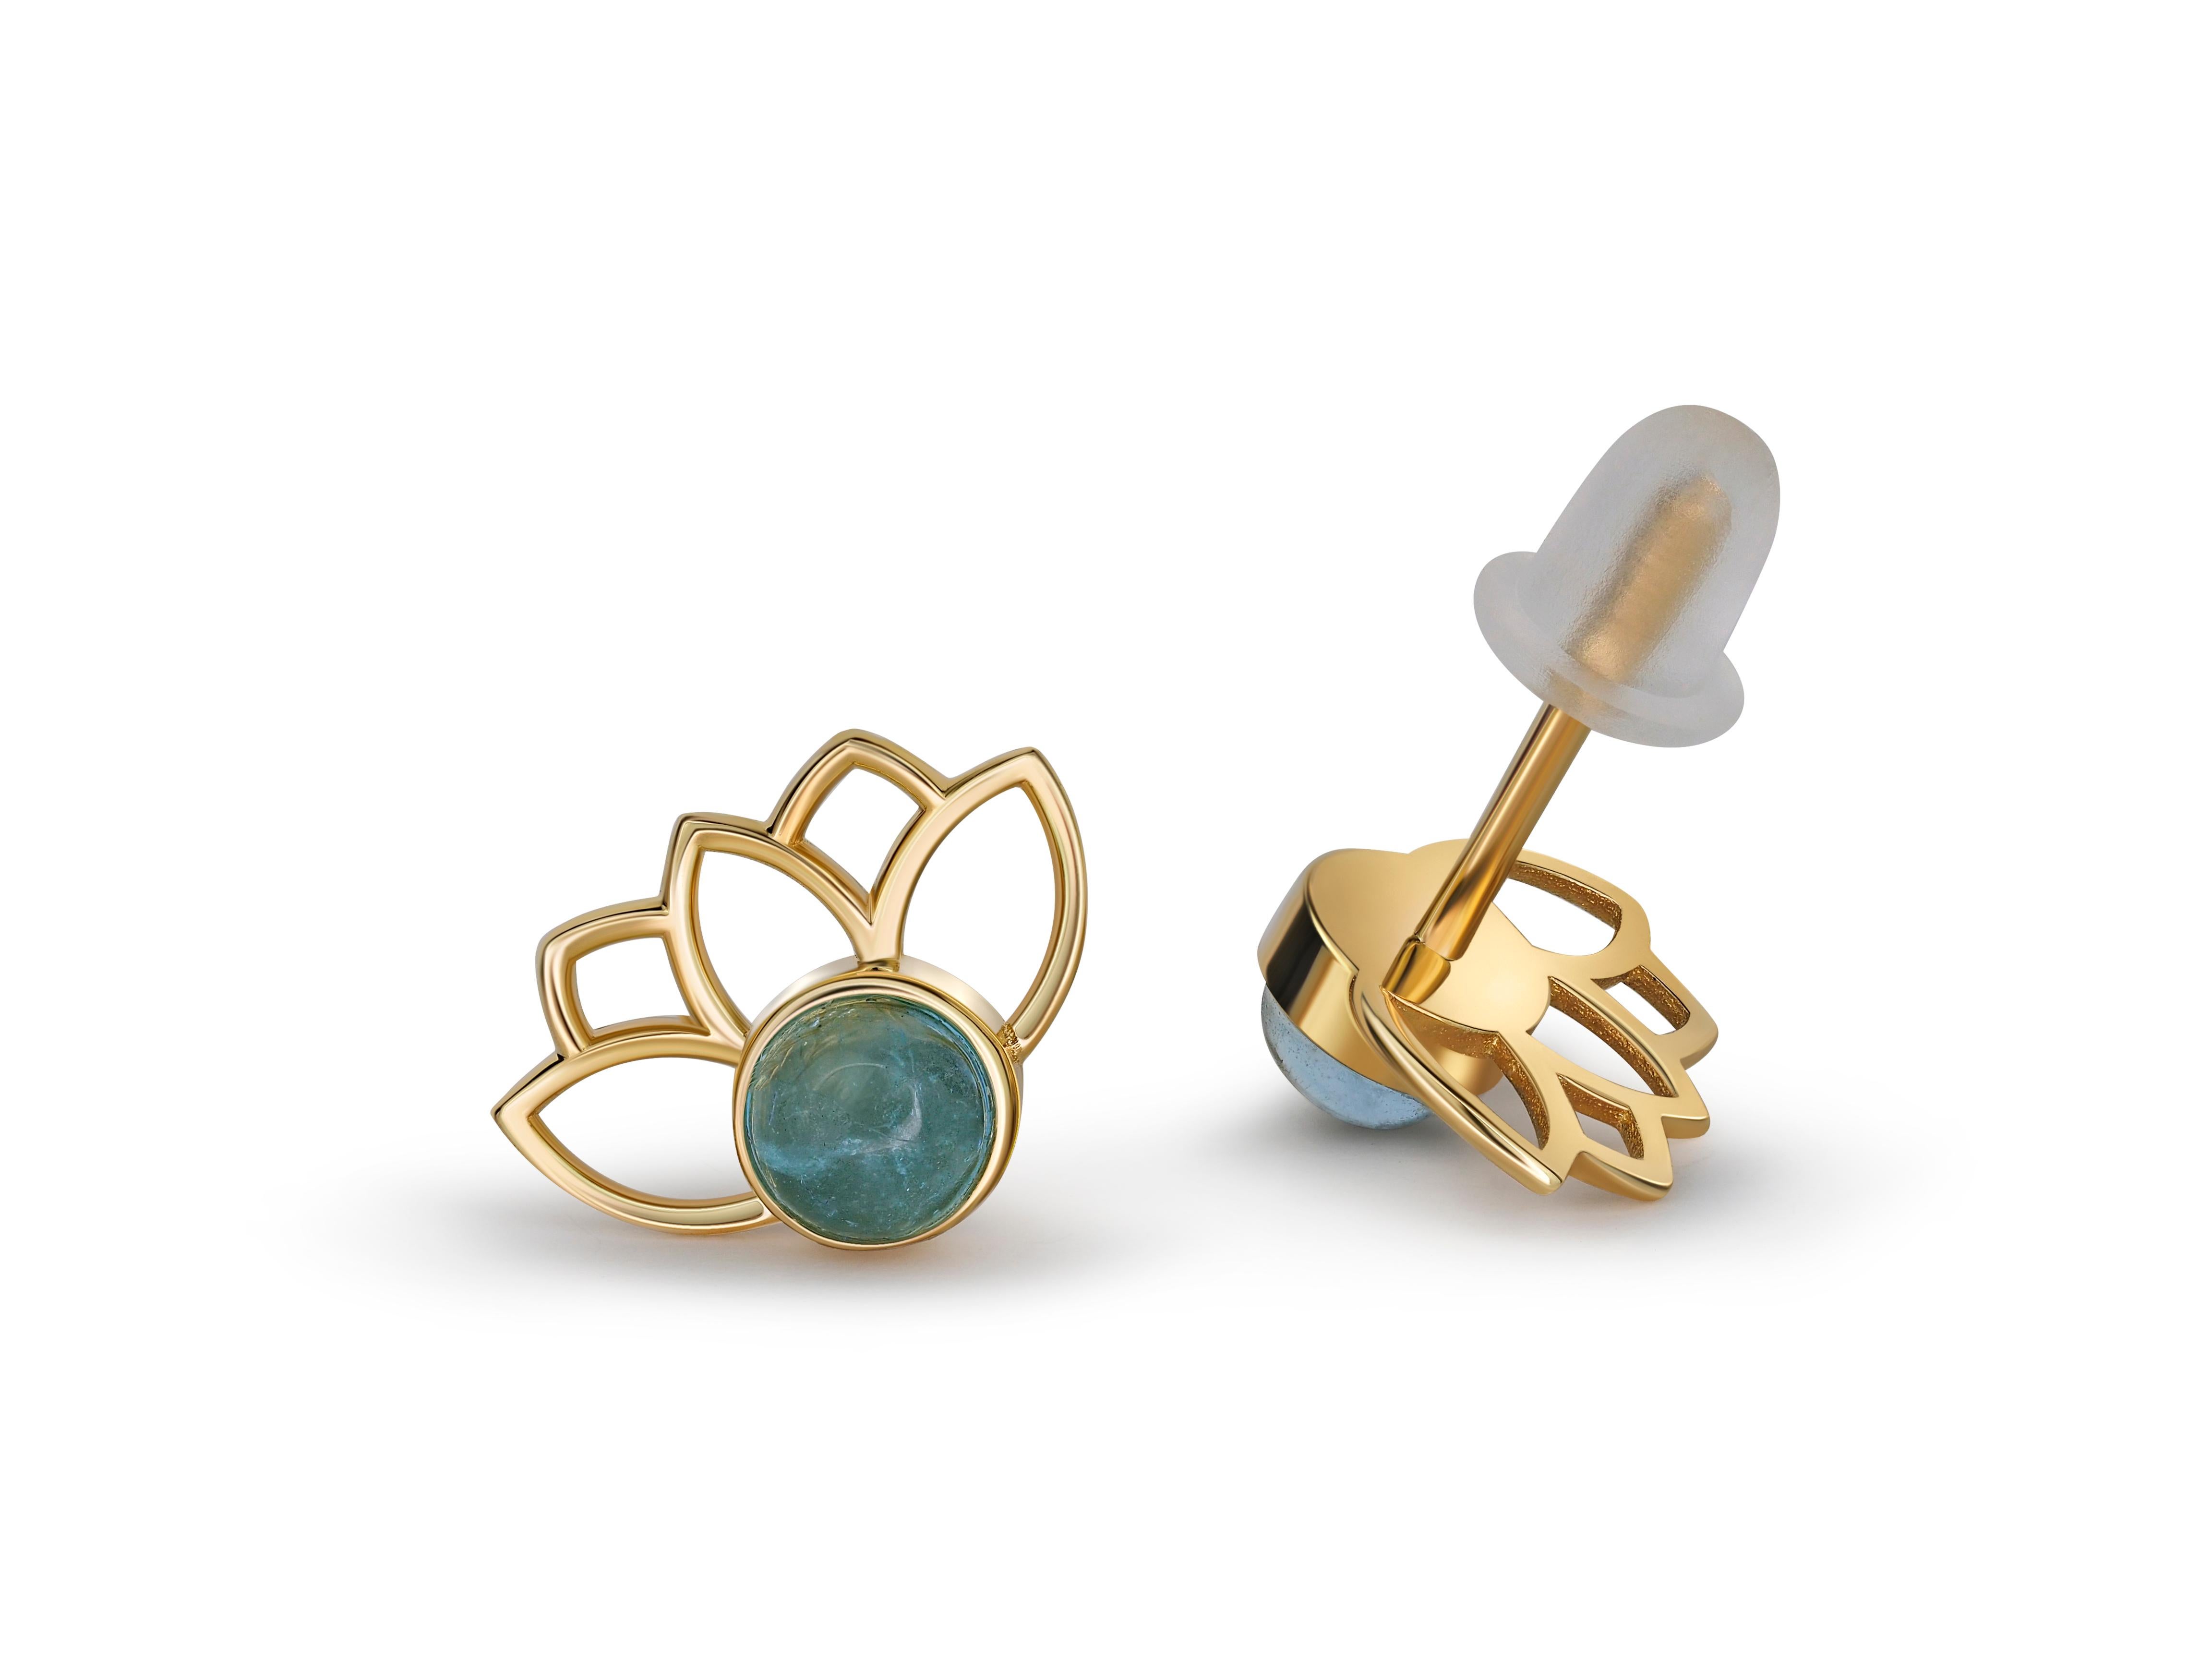 Modern Lotus Earrings Studs with Aquamarines in 14k Gold, Aquamarine Cab Earrings For Sale